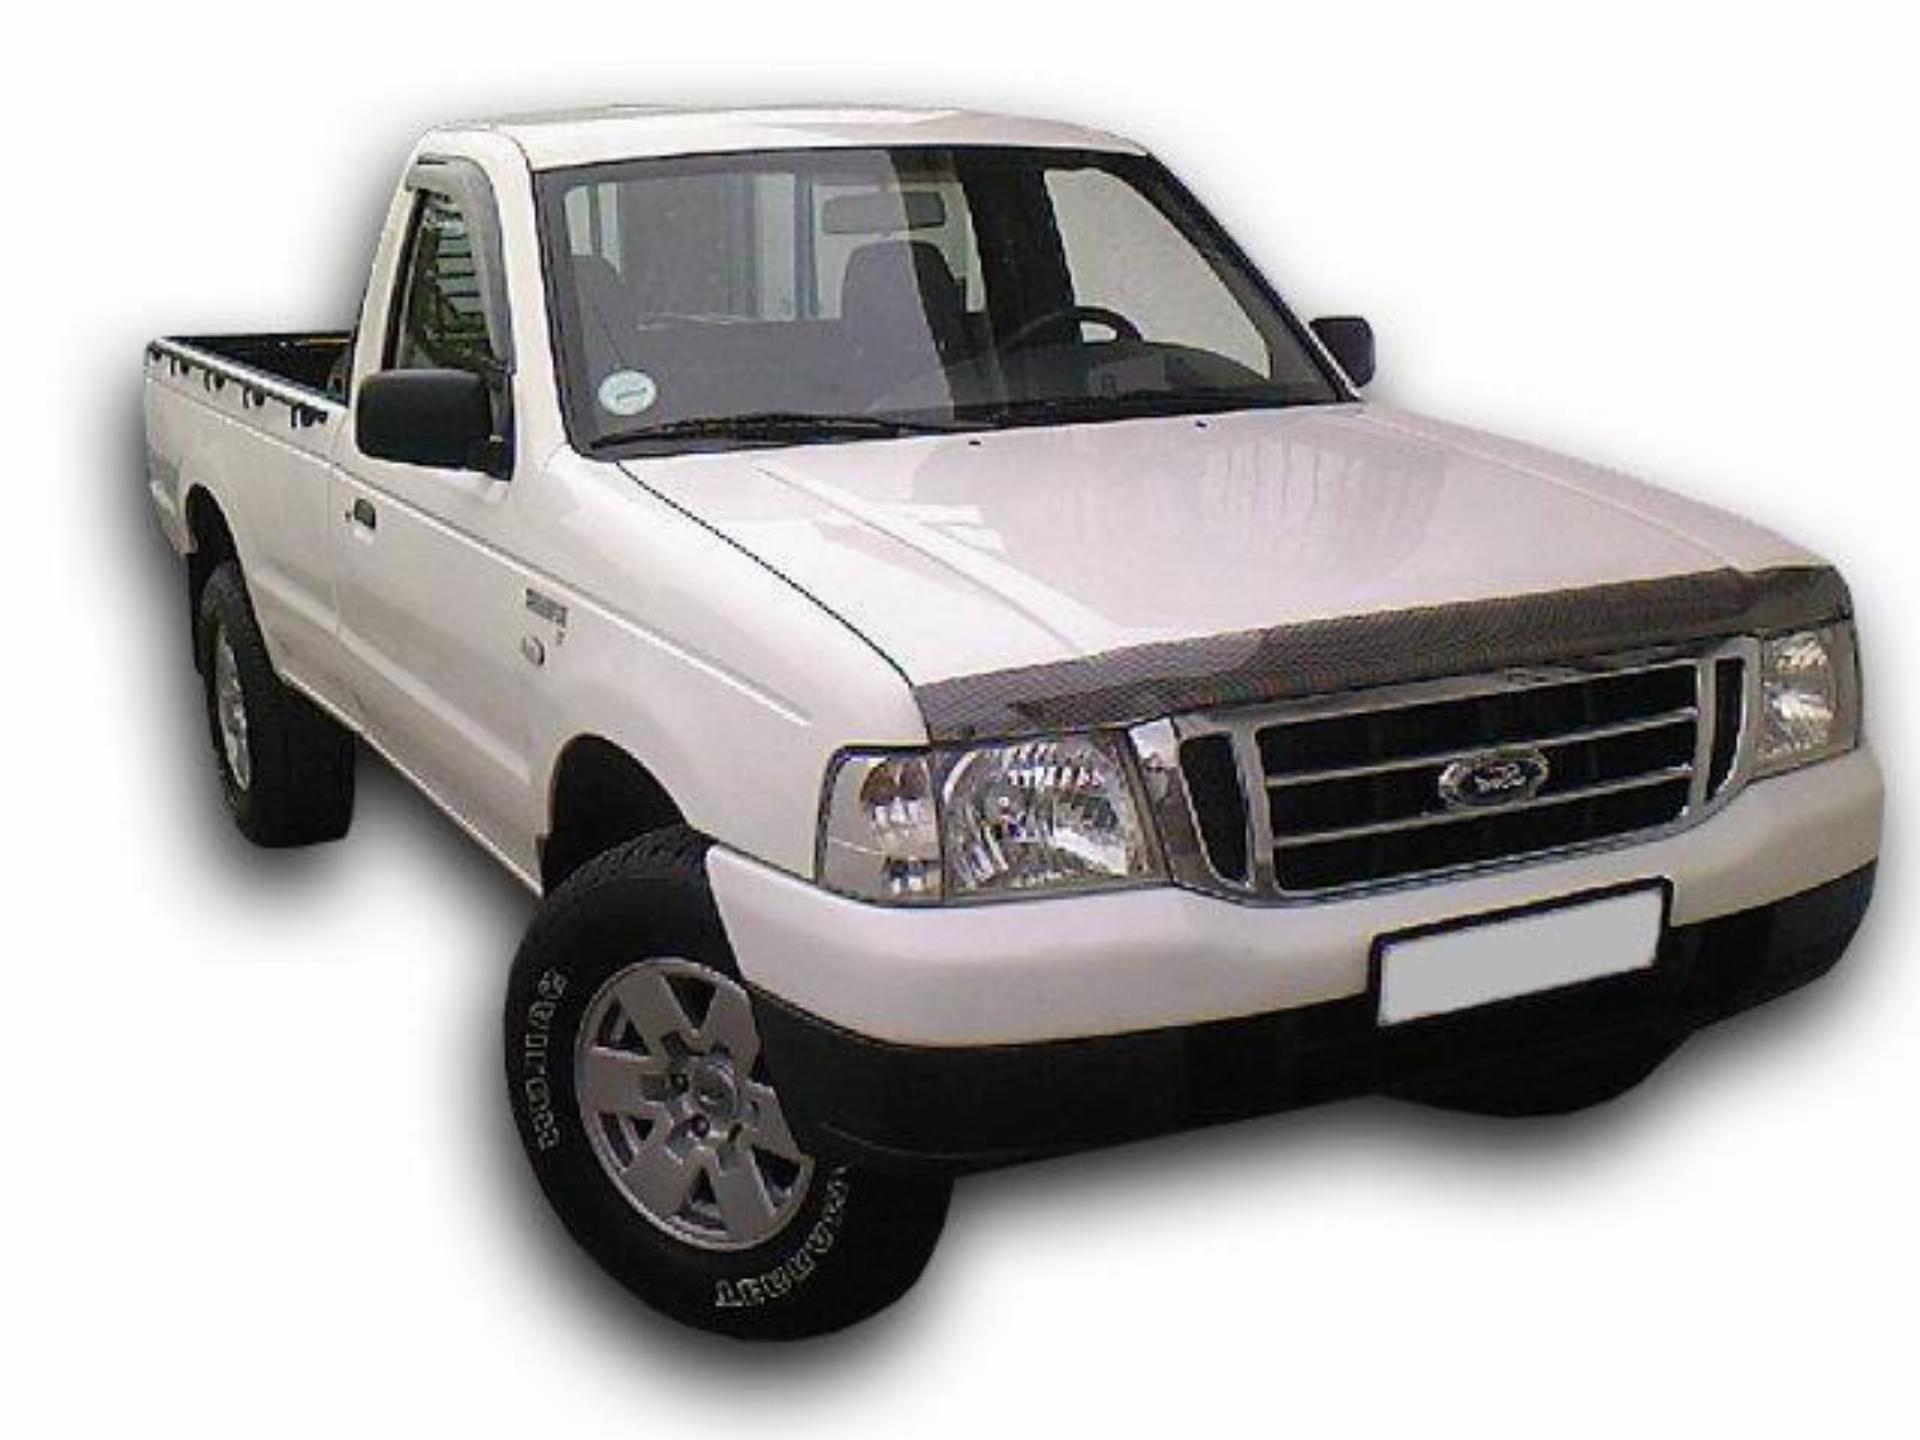 Used Ford Ranger 2.5 TD XL HI Trail 2006 on auction